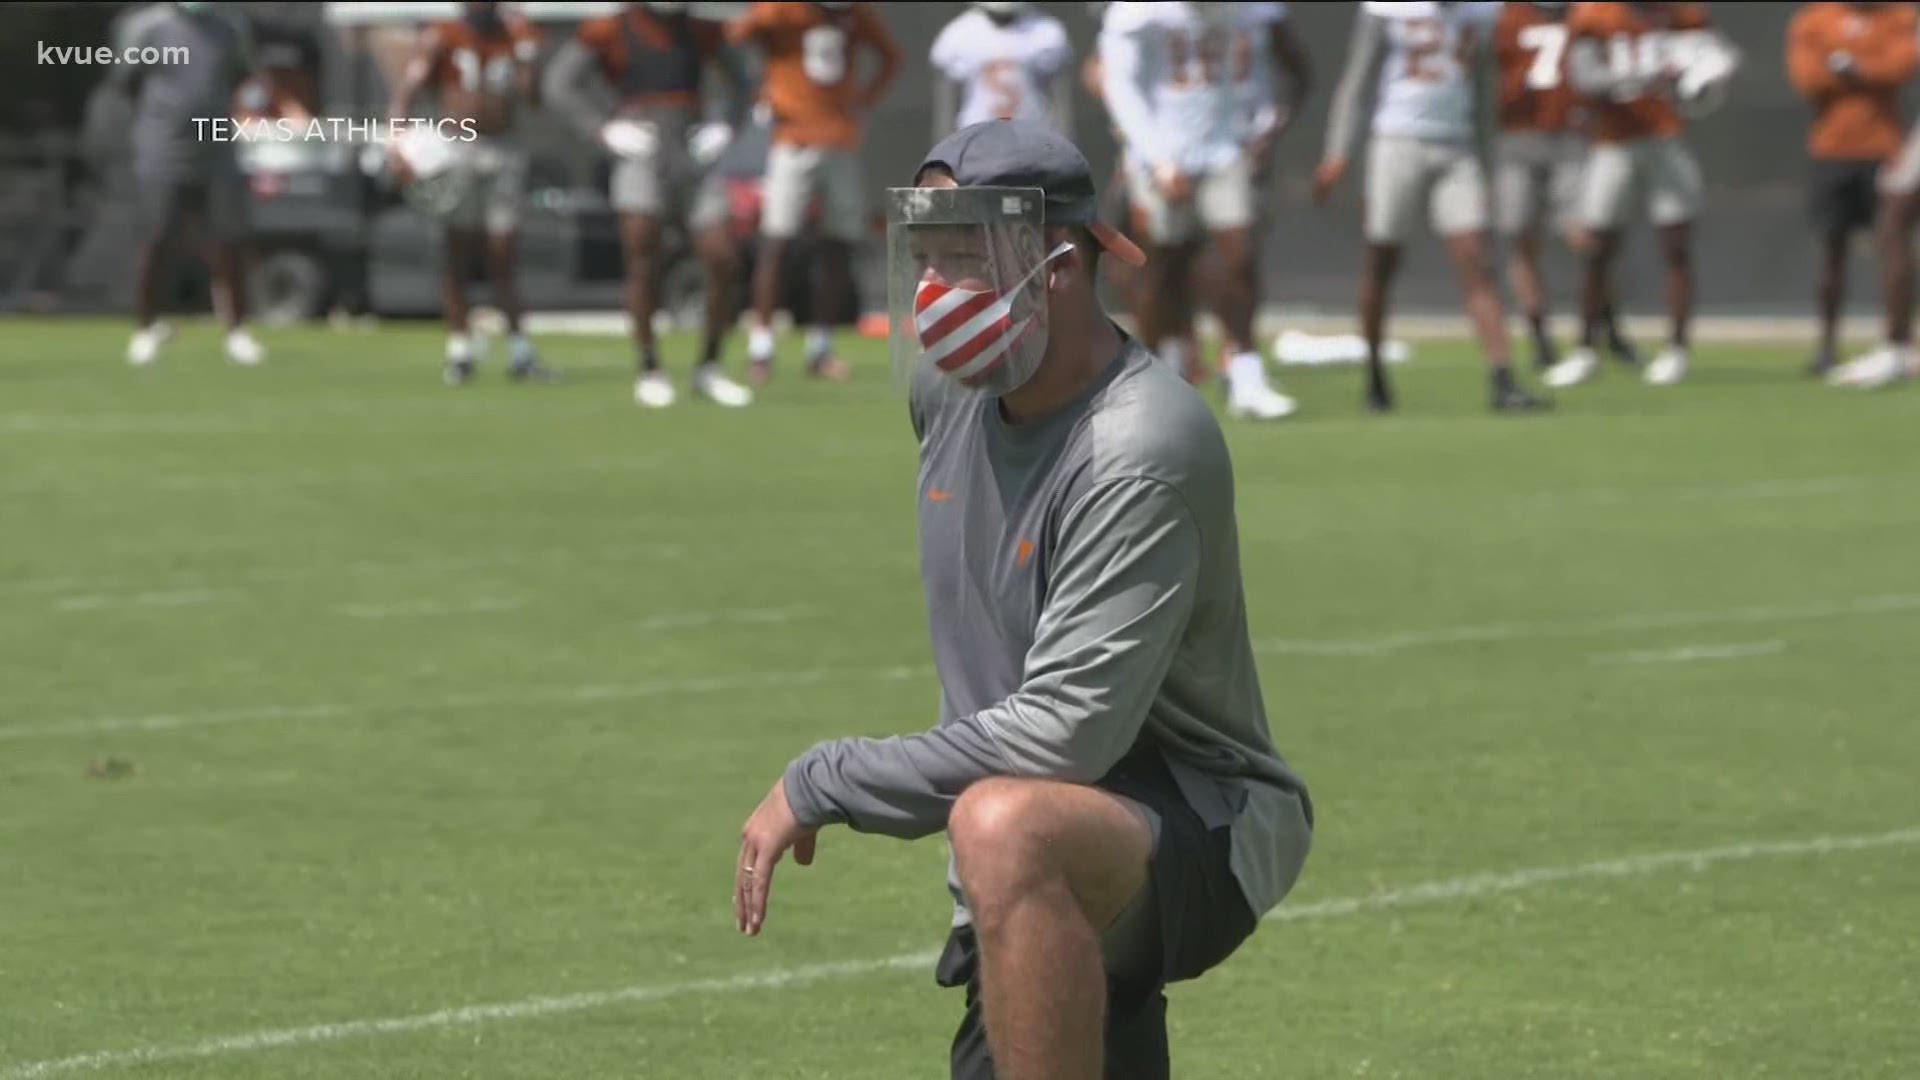 On Friday, the Texas Longhorns returned to the field starting their fall camp for the 2020 season.